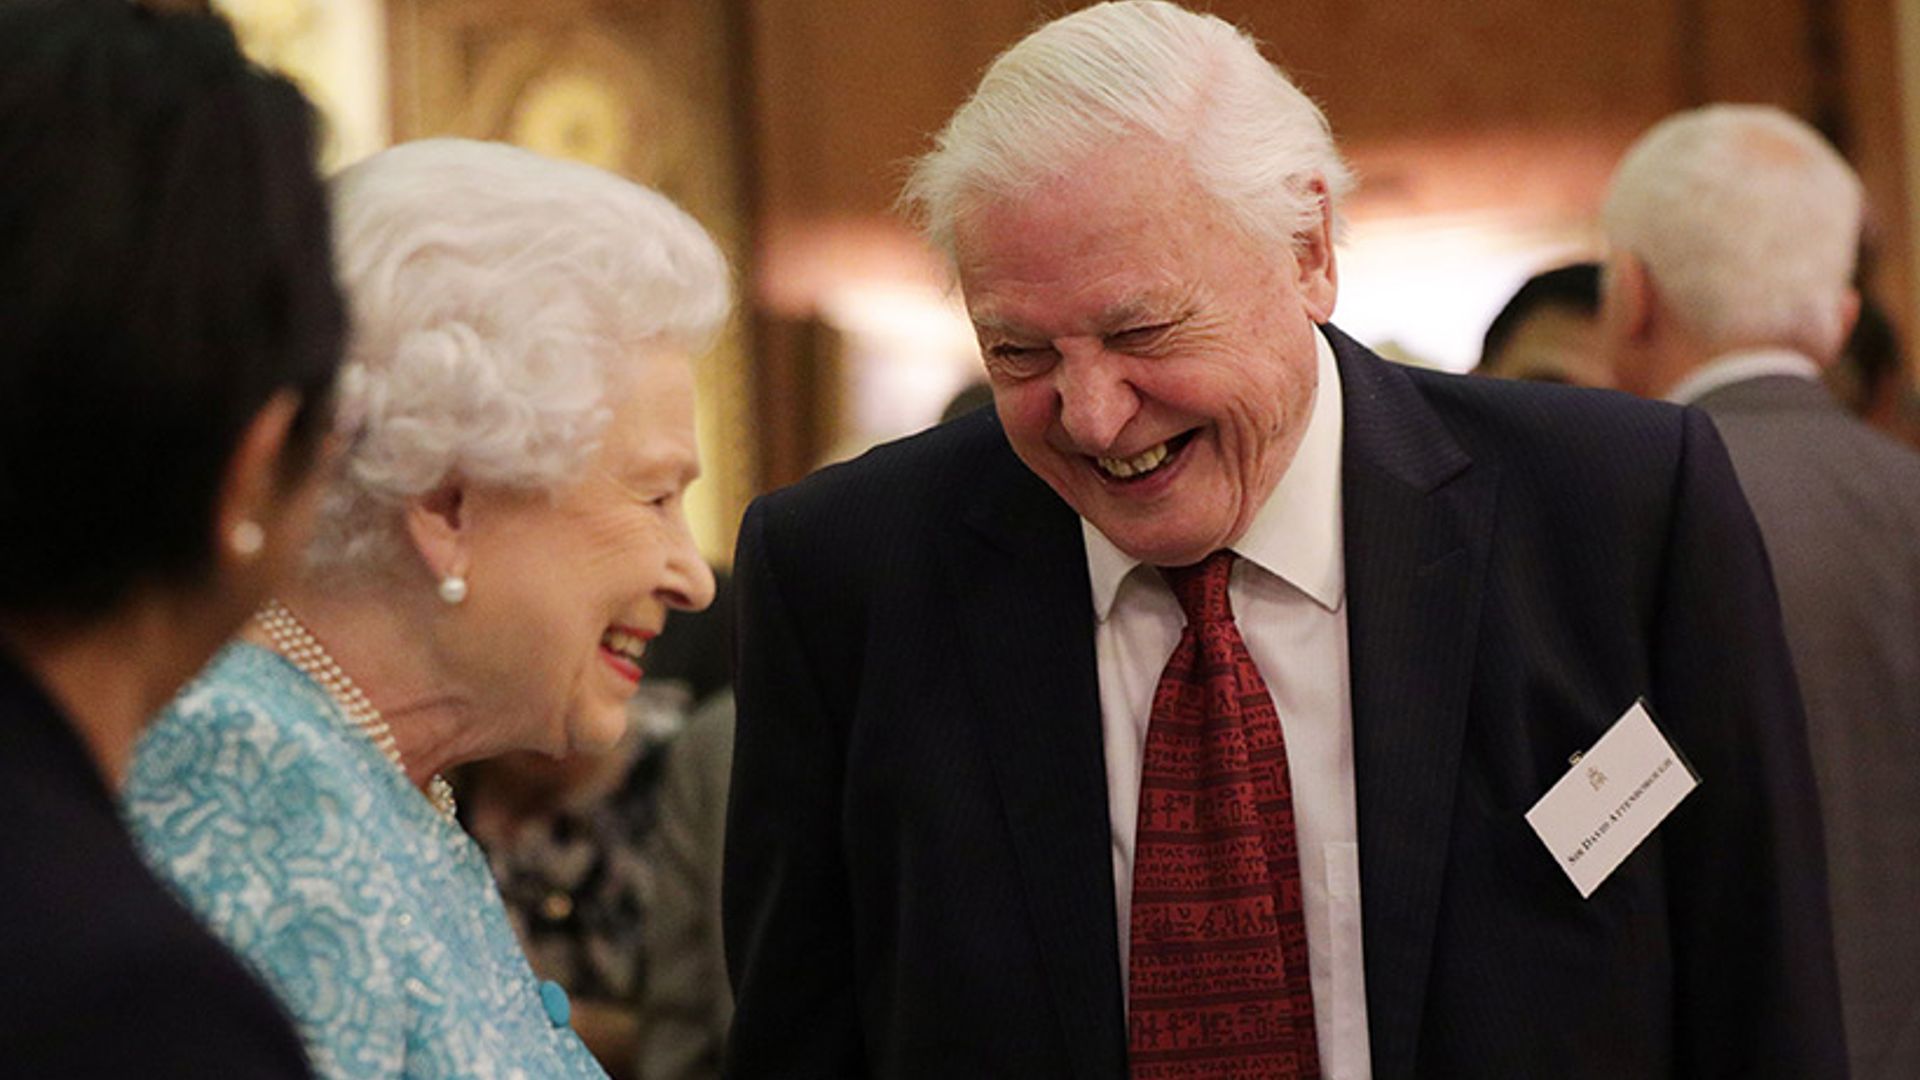 Sir David Attenborough laughing with the Queen